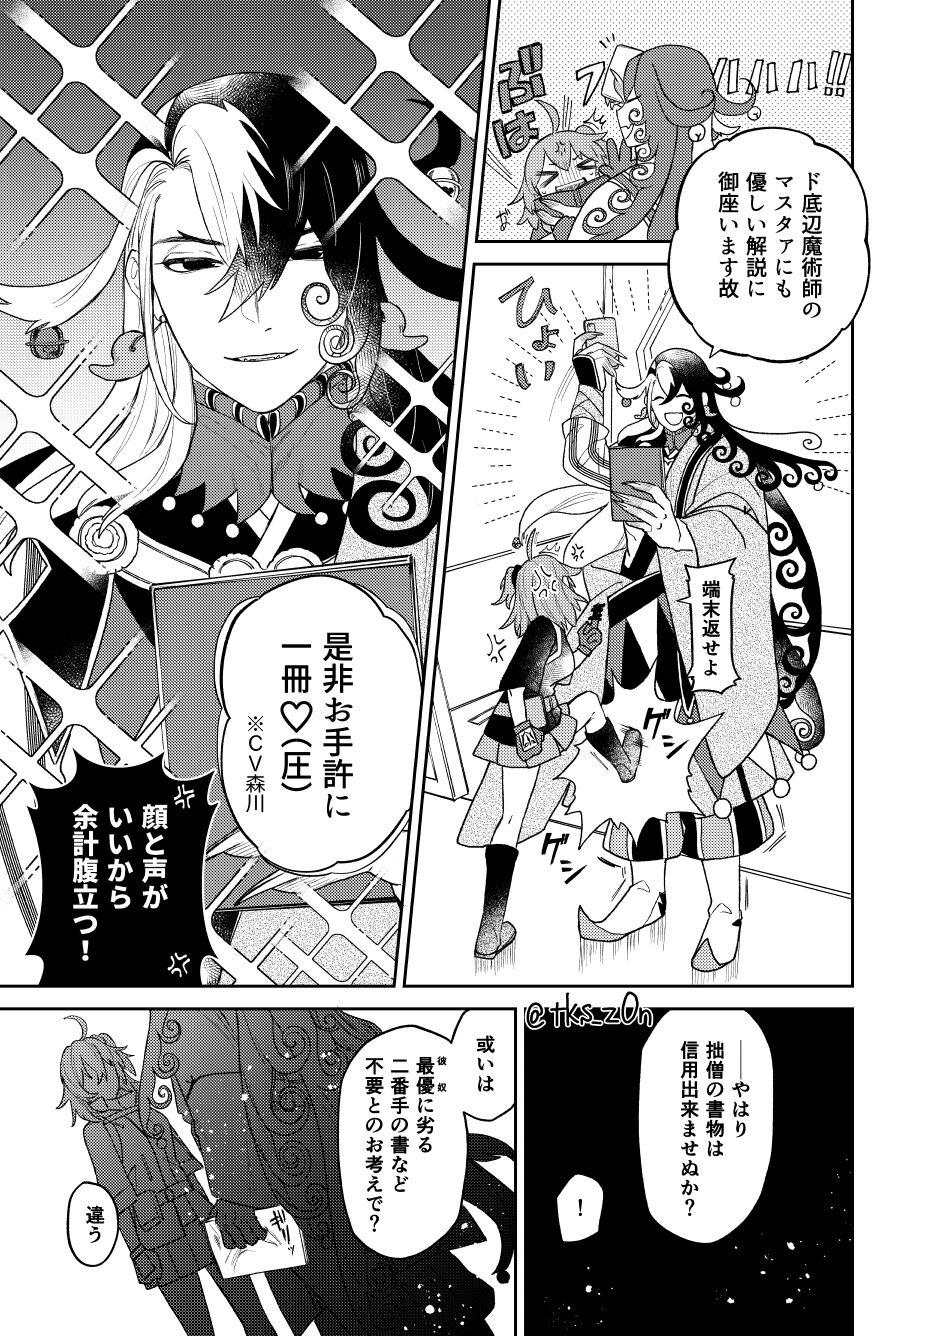 Young Old ][Rin guda ♀ matome[ fate grand order ) - Fate grand order Highheels - Page 9